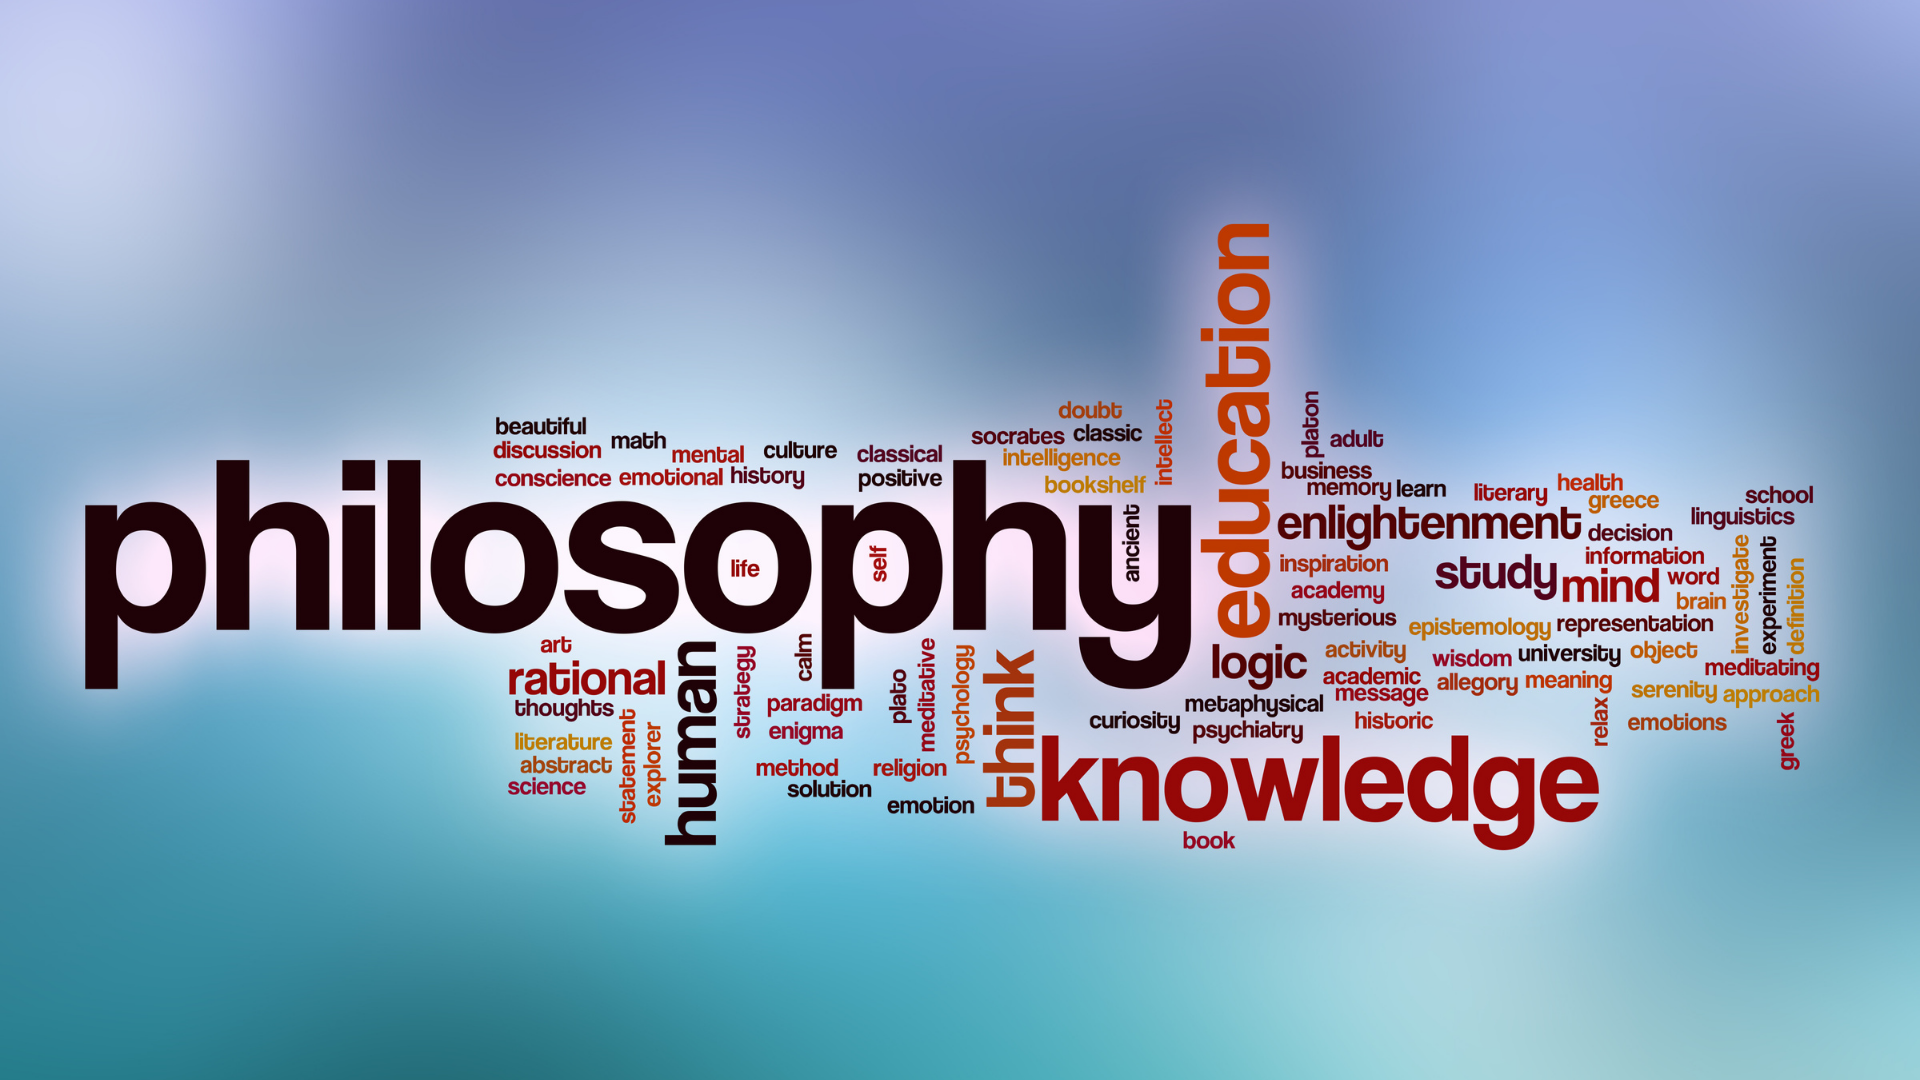 Philosophy and education graphic